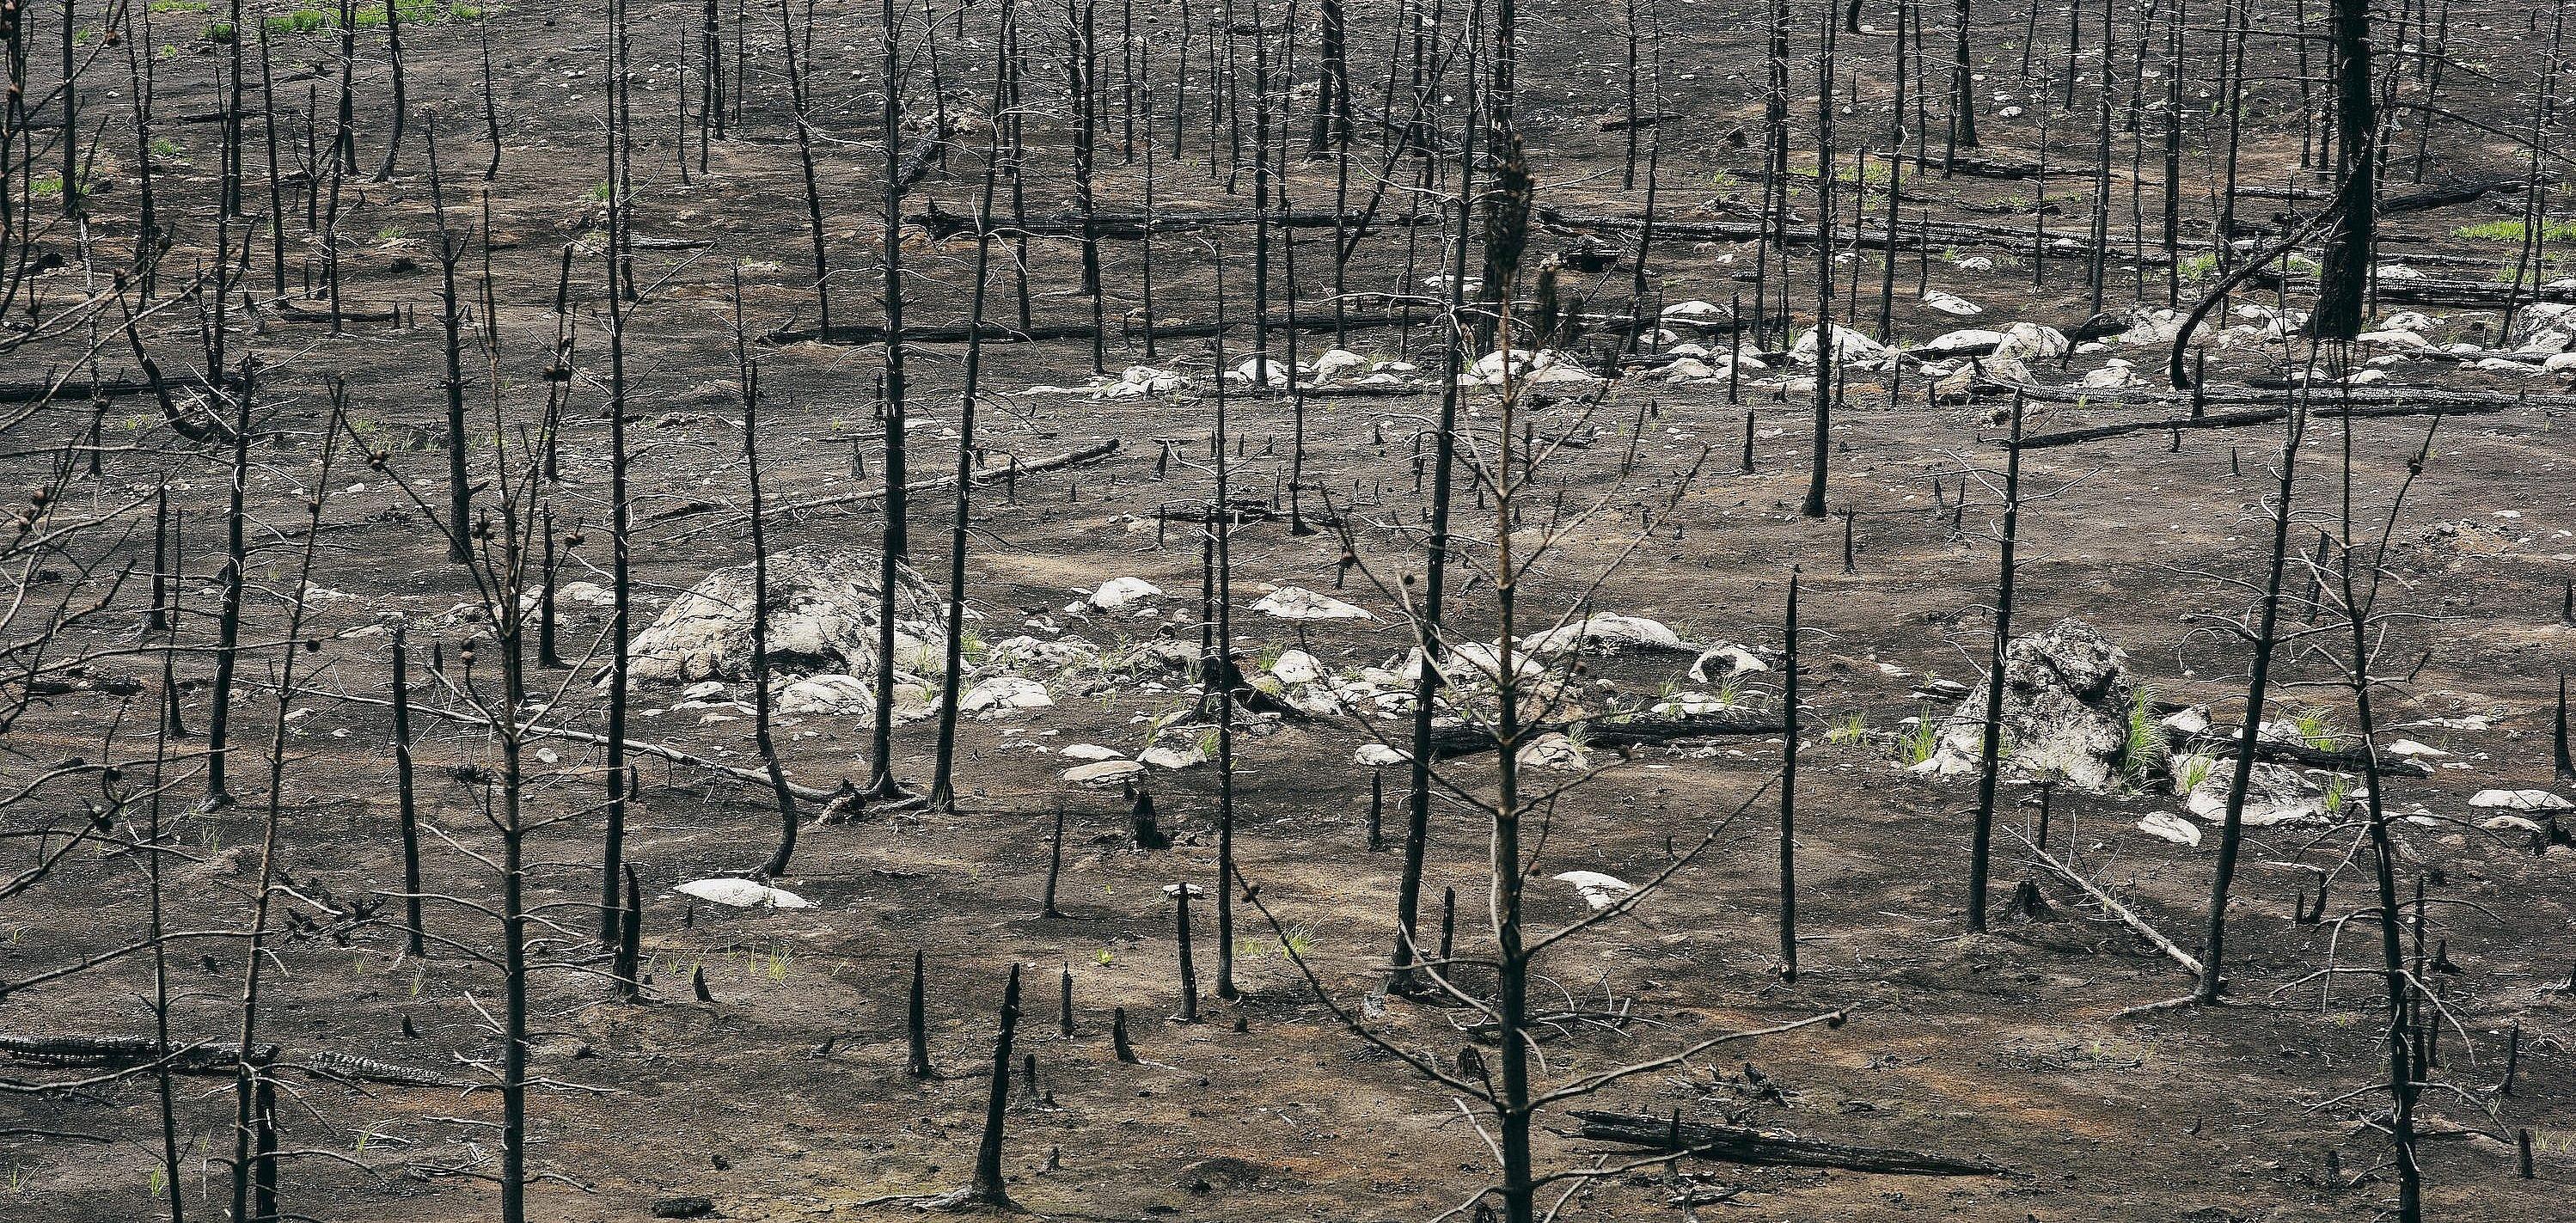 Dead wood: The trees around the community of Logan Lake were scorched in last summerâs wildfires. Thanks to careful preparation and a shift in the wind, the town itself was spared.